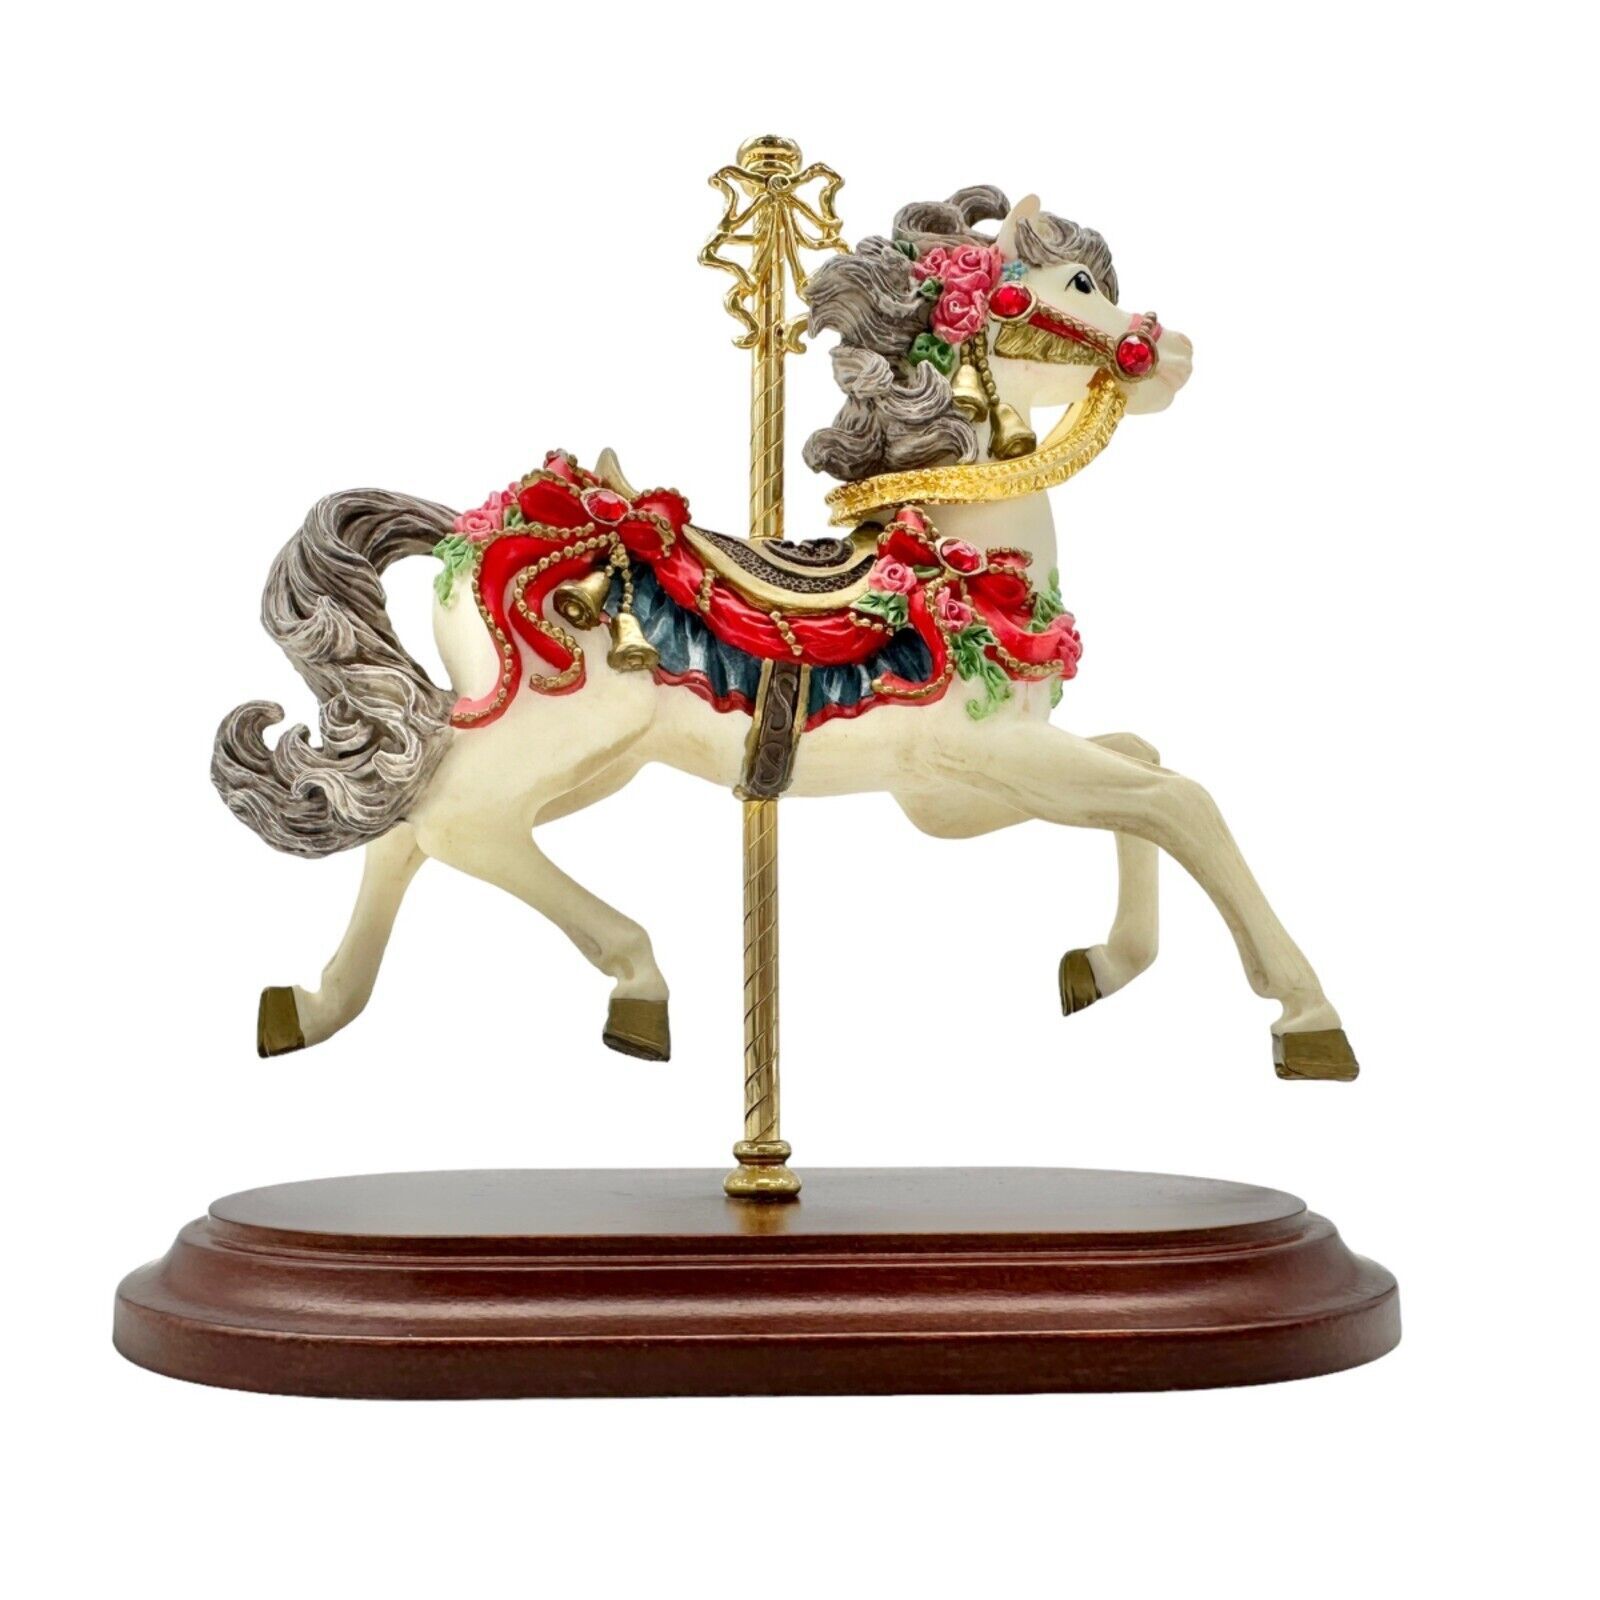 Primary image for The Hamilton Collection Ruby Prancer from the Jeweled Carousel Horse Sculpture